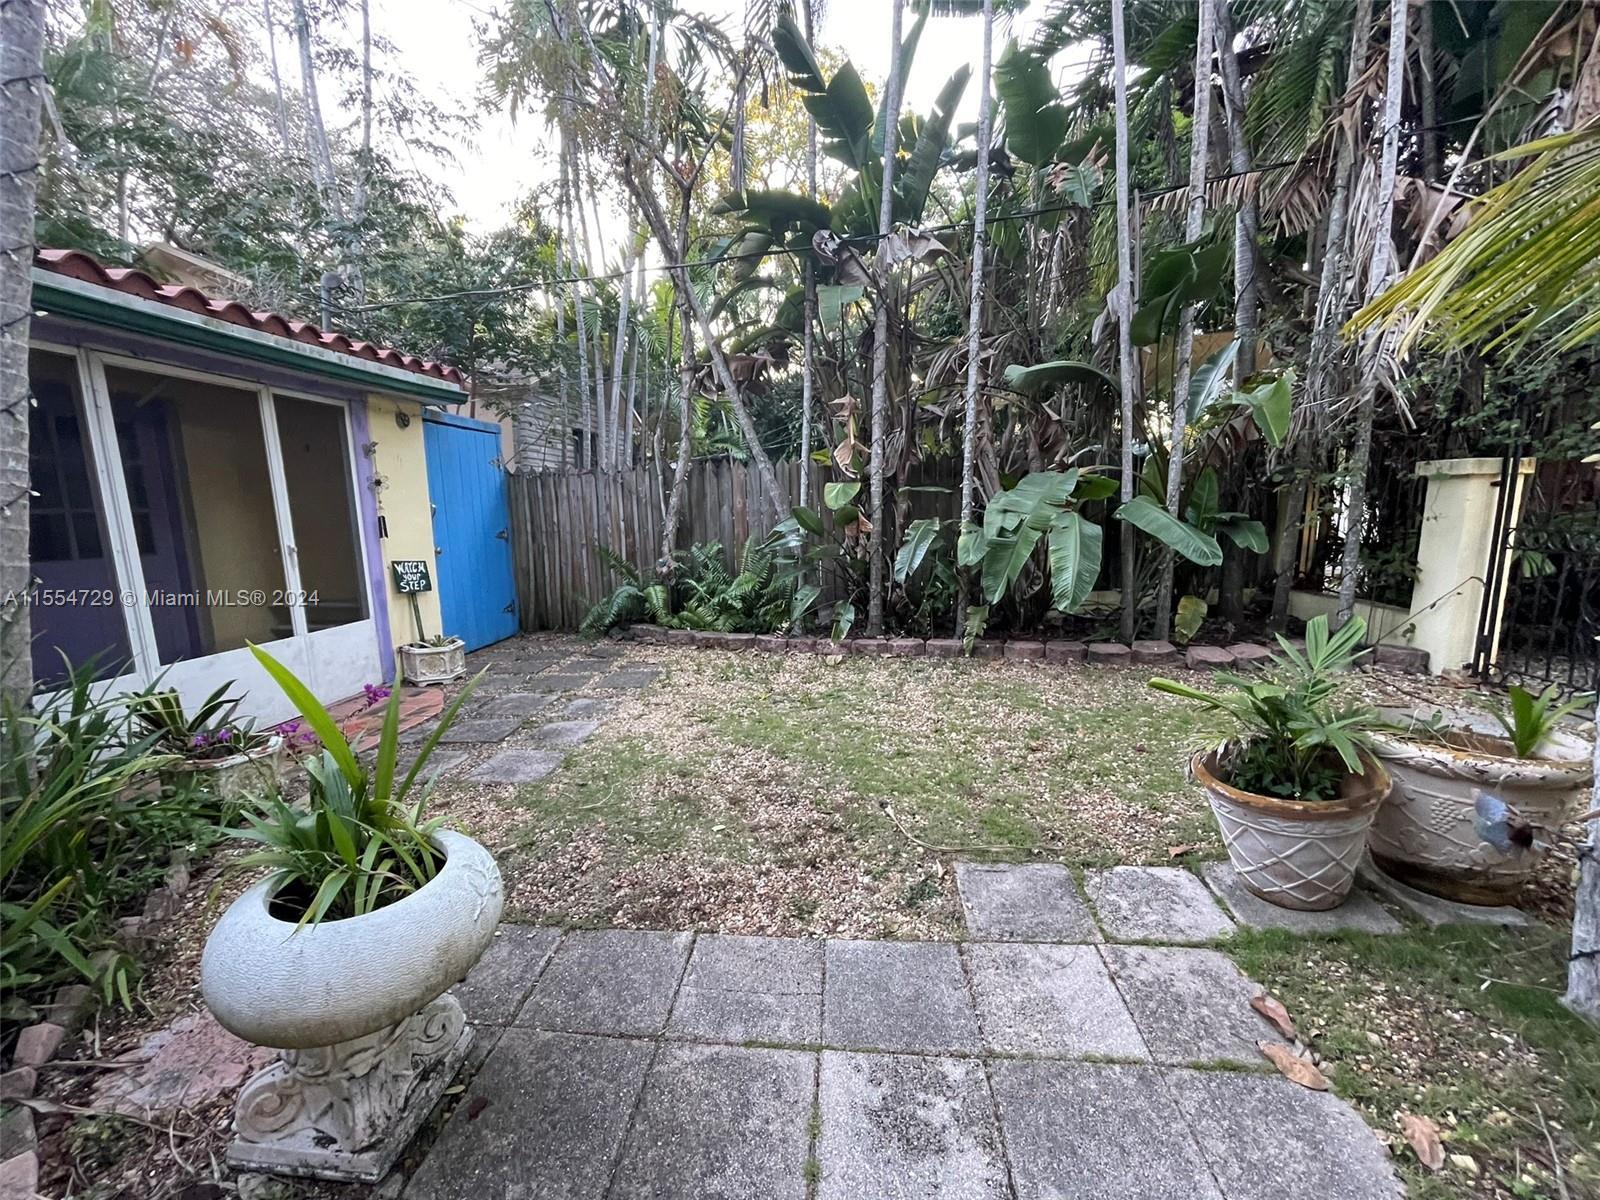 Unique opportunity to lease Coconut Grove bungalow for office or general commercial and professional